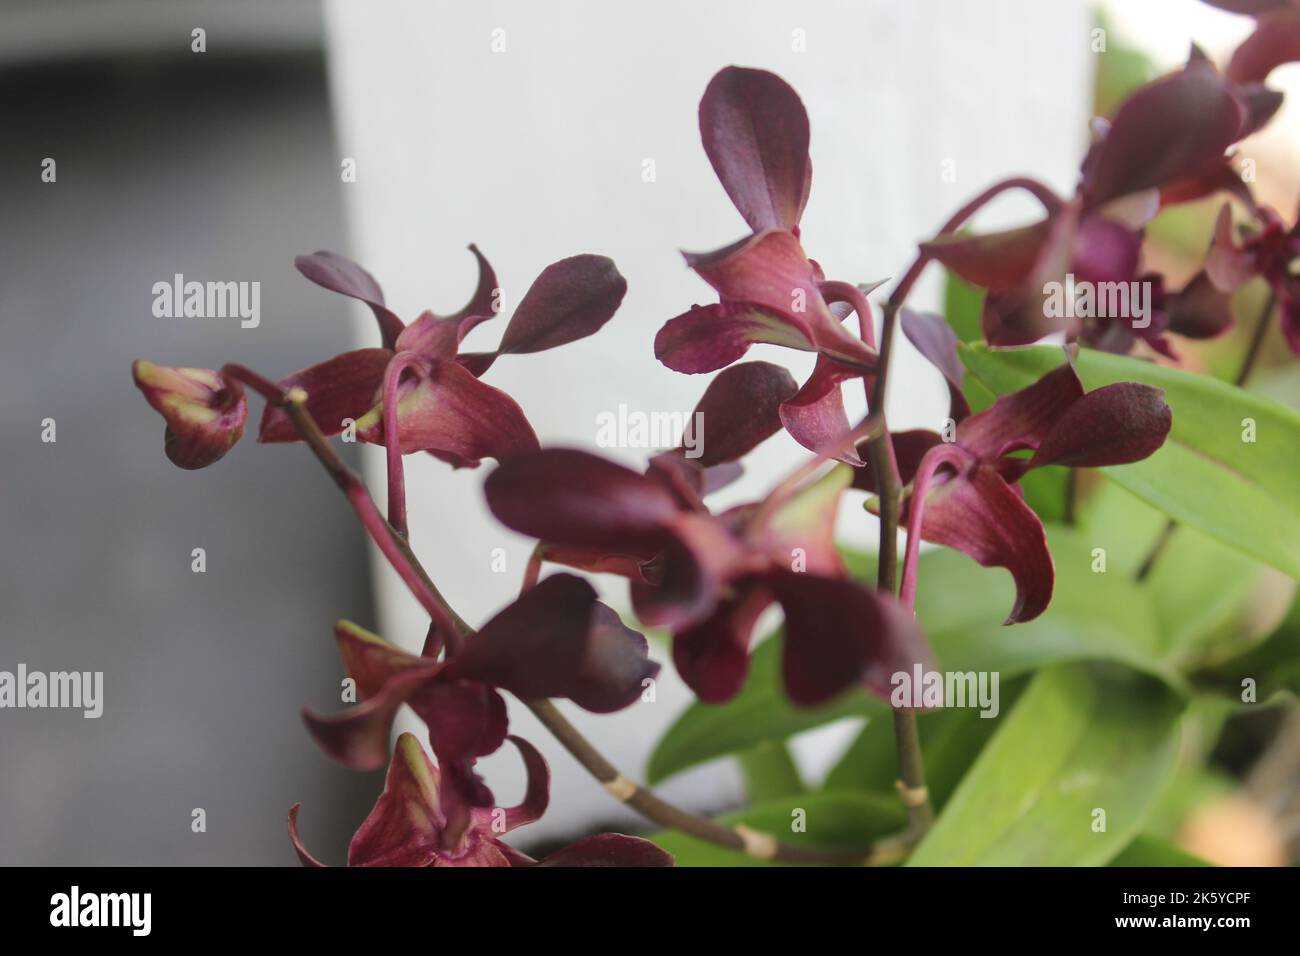 Selective focus of beautiful dendrobium orchid (Dendrobium sp.) flower in garden. Family: Orchidaceae. Stock Photo